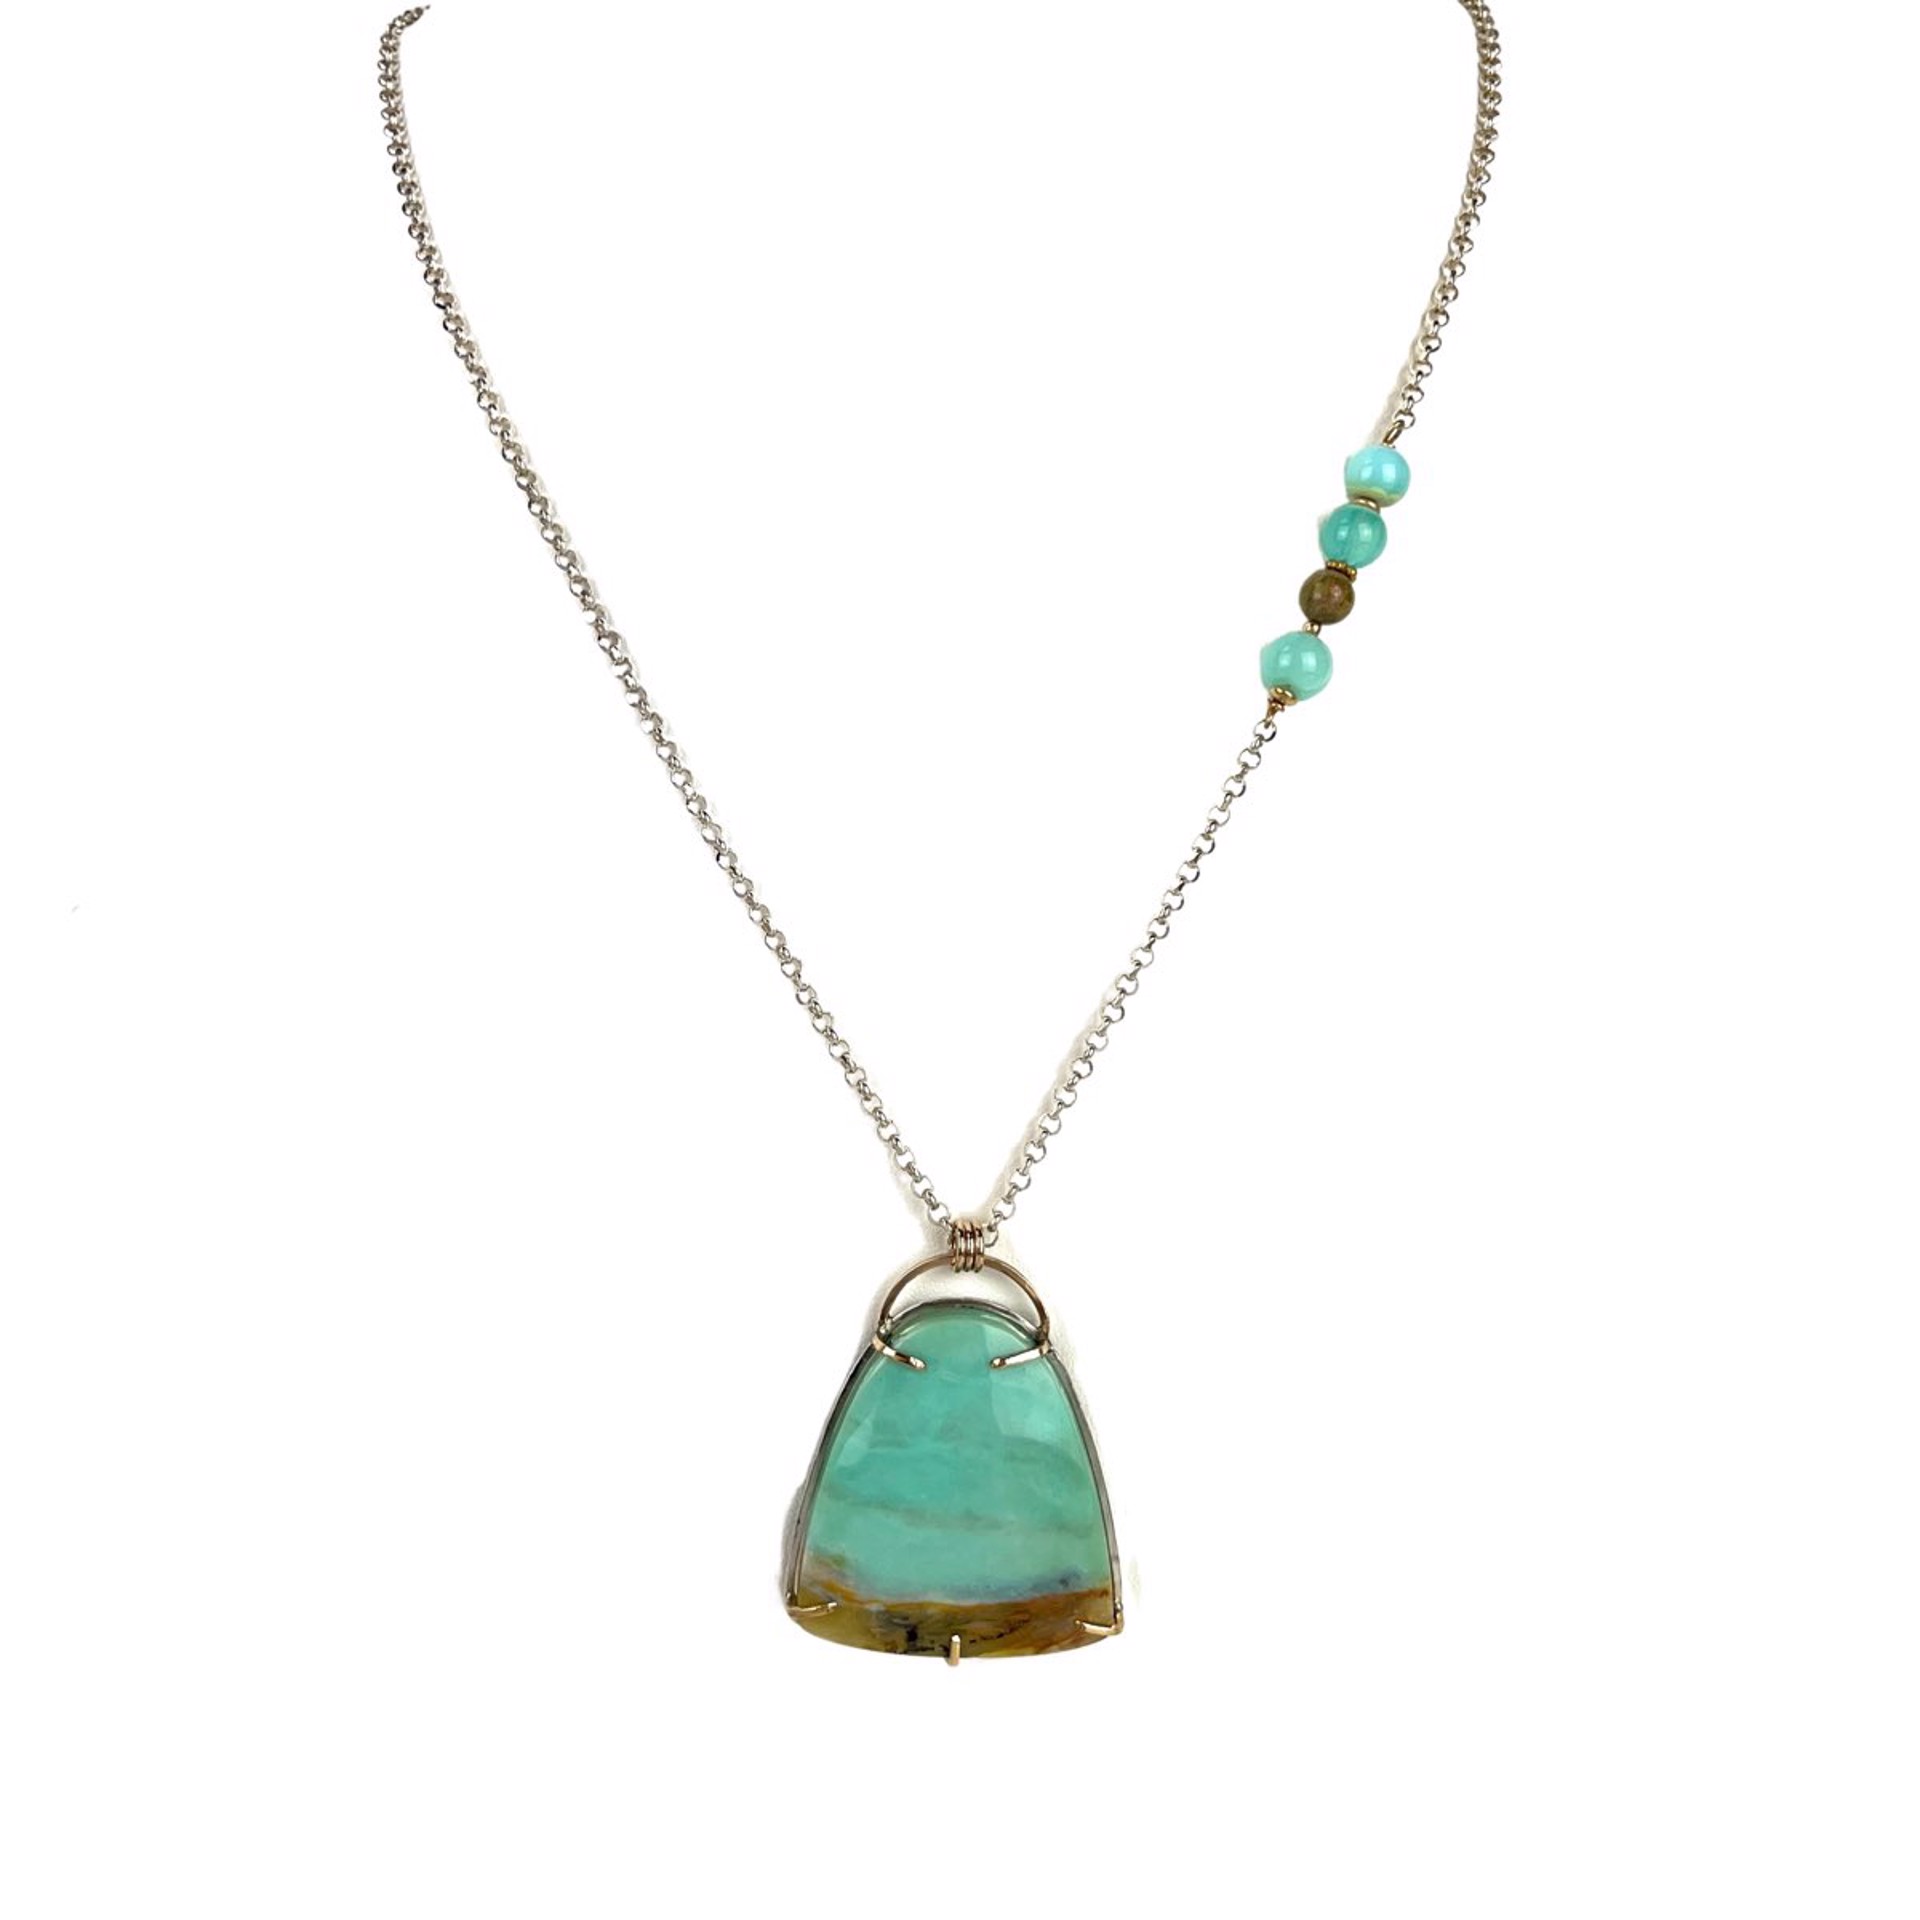 Opalized Petrified Wood, Peruvian Opal,  Sterling Silver and 14KGF Necklace by Nola Smodic